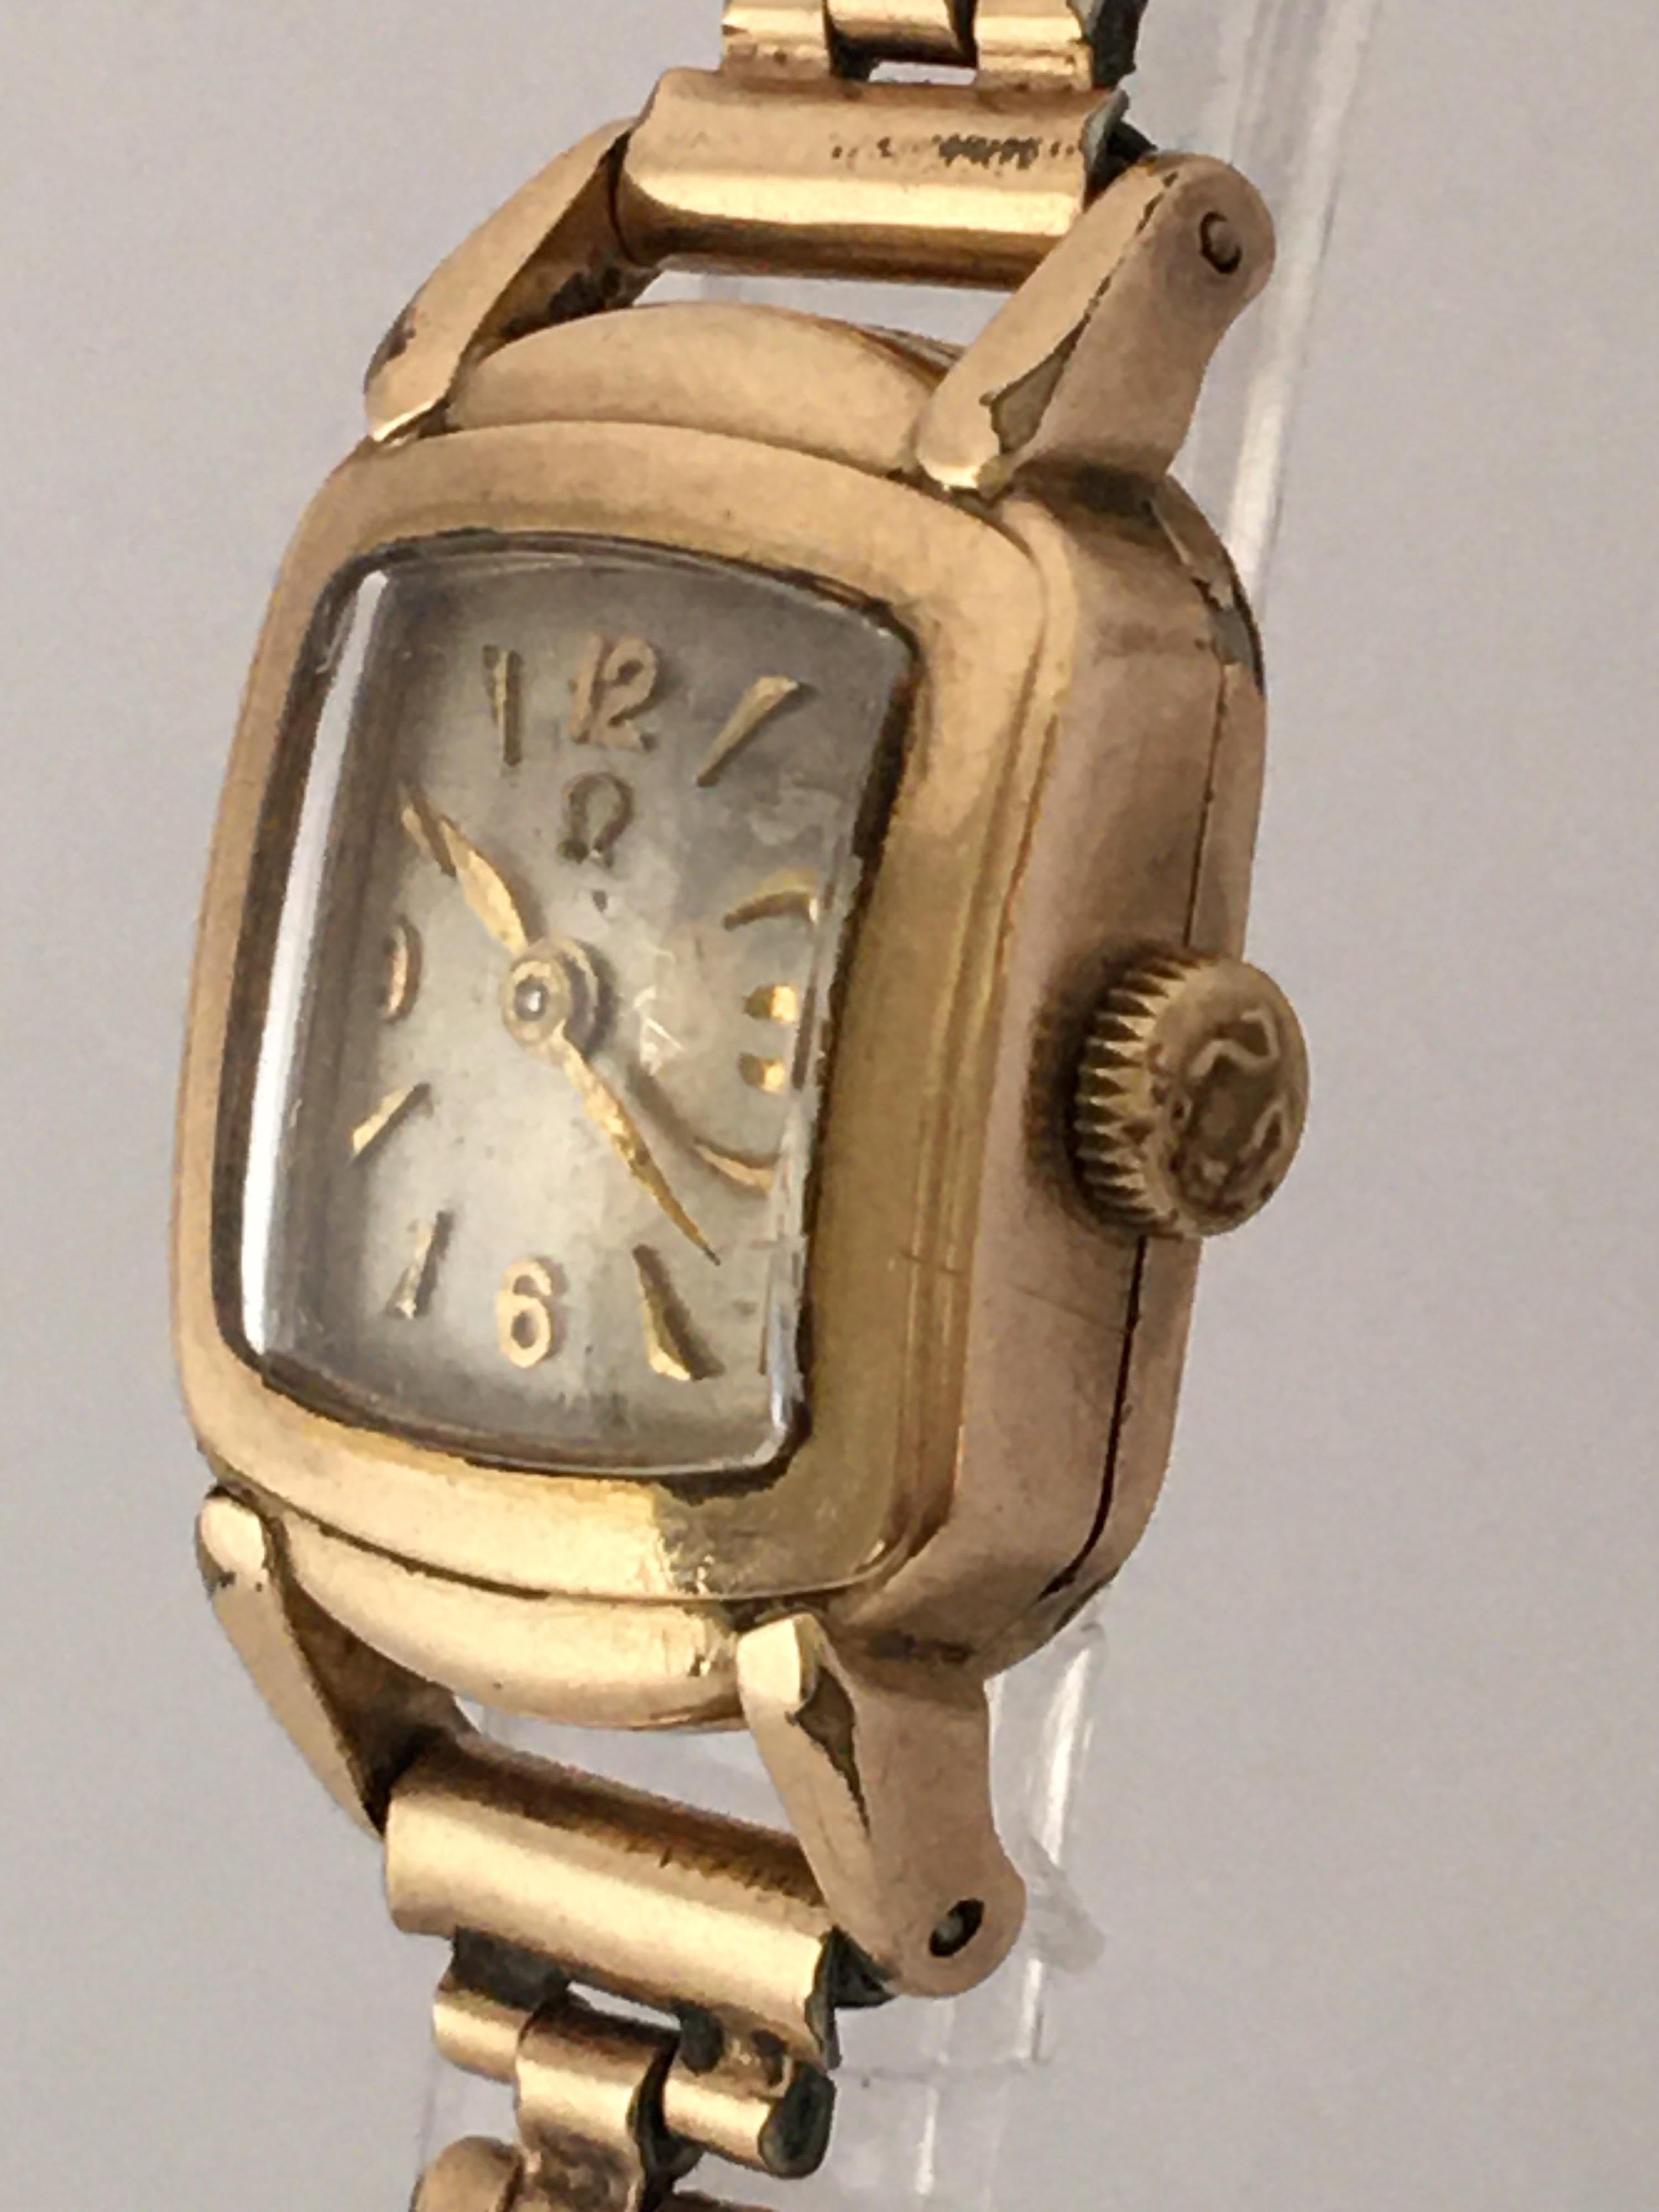 This beautiful and tiny gold plated vintage hand winding watch is working and is running well. Visible signs of wear and ageing with the silvered watch dial is a bit worn. some light tiny scratches on the glass and on the watch case. The gold plated